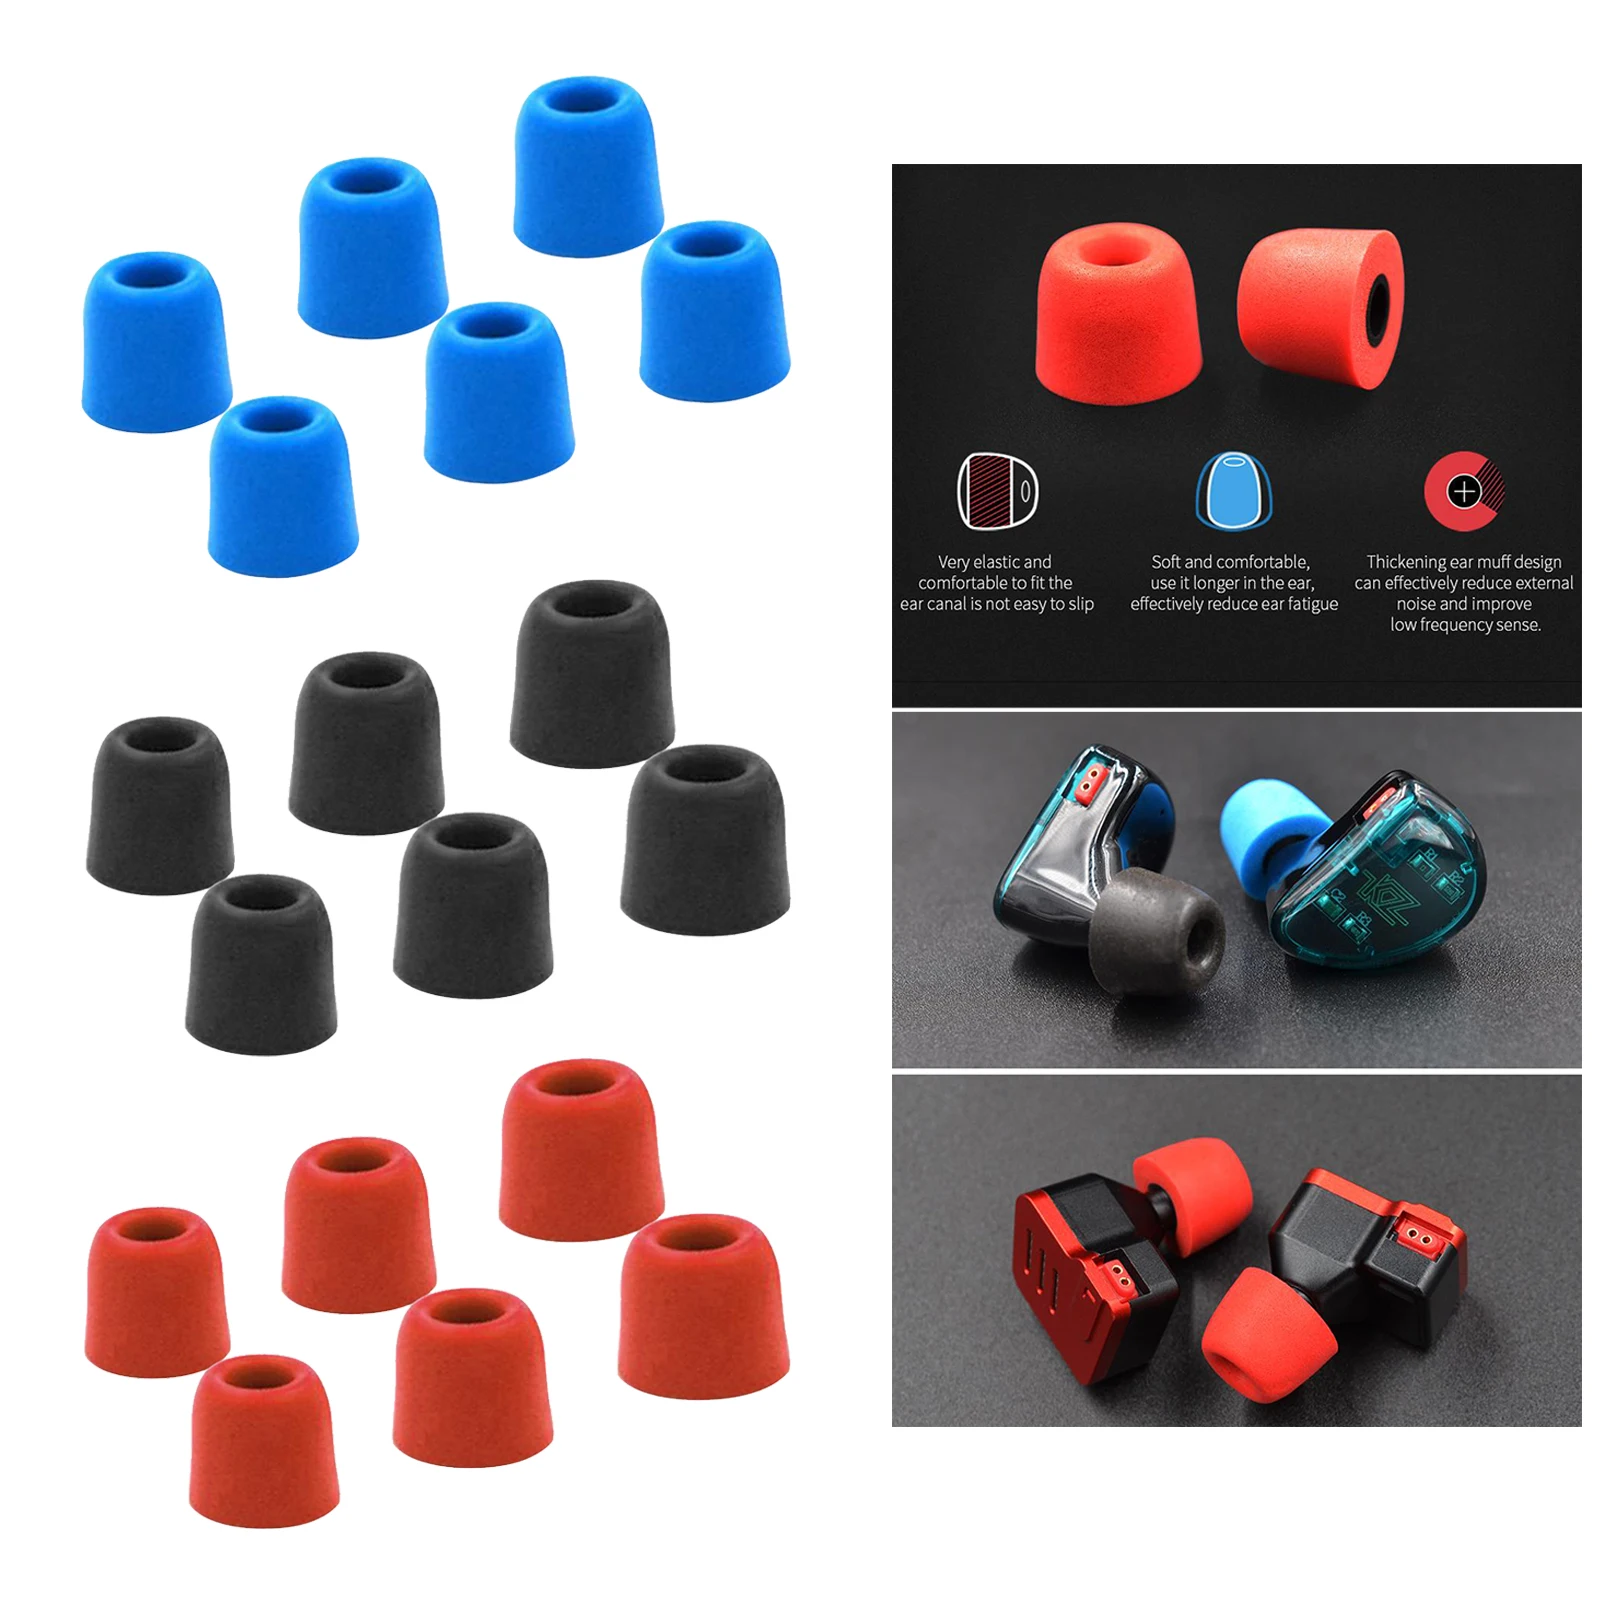 New 3Pair(6pcs) Noise Isolating Comfortble Memory Foam Ear Tips Pads Earbuds For In Earphone Headphones